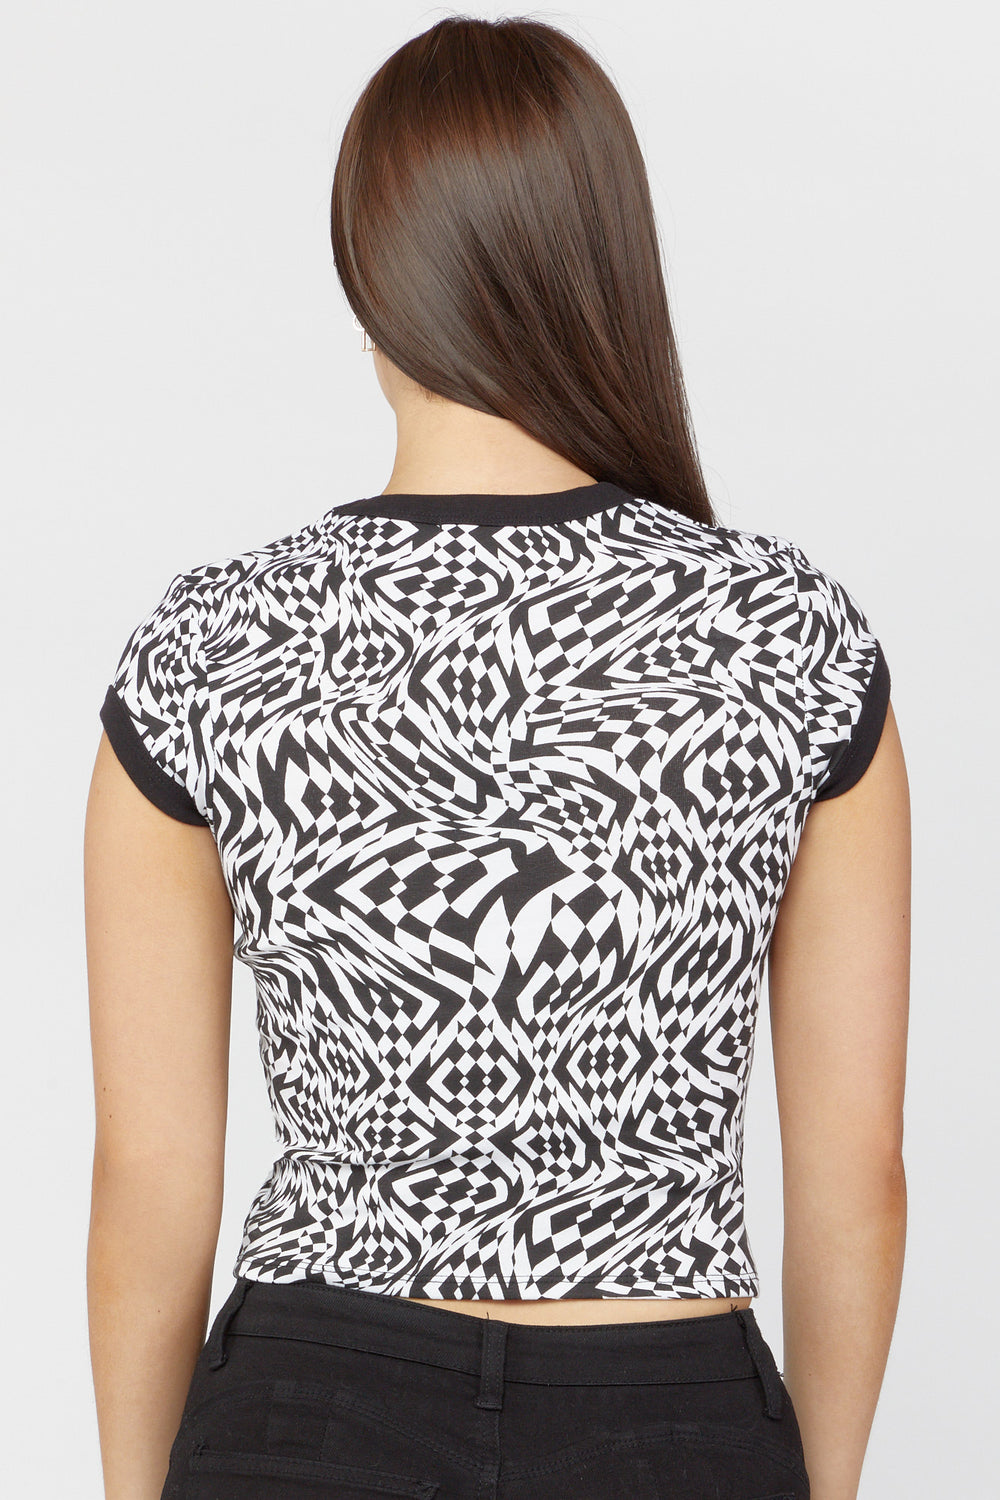 Cutout Graphic Cropped Tee Black with White